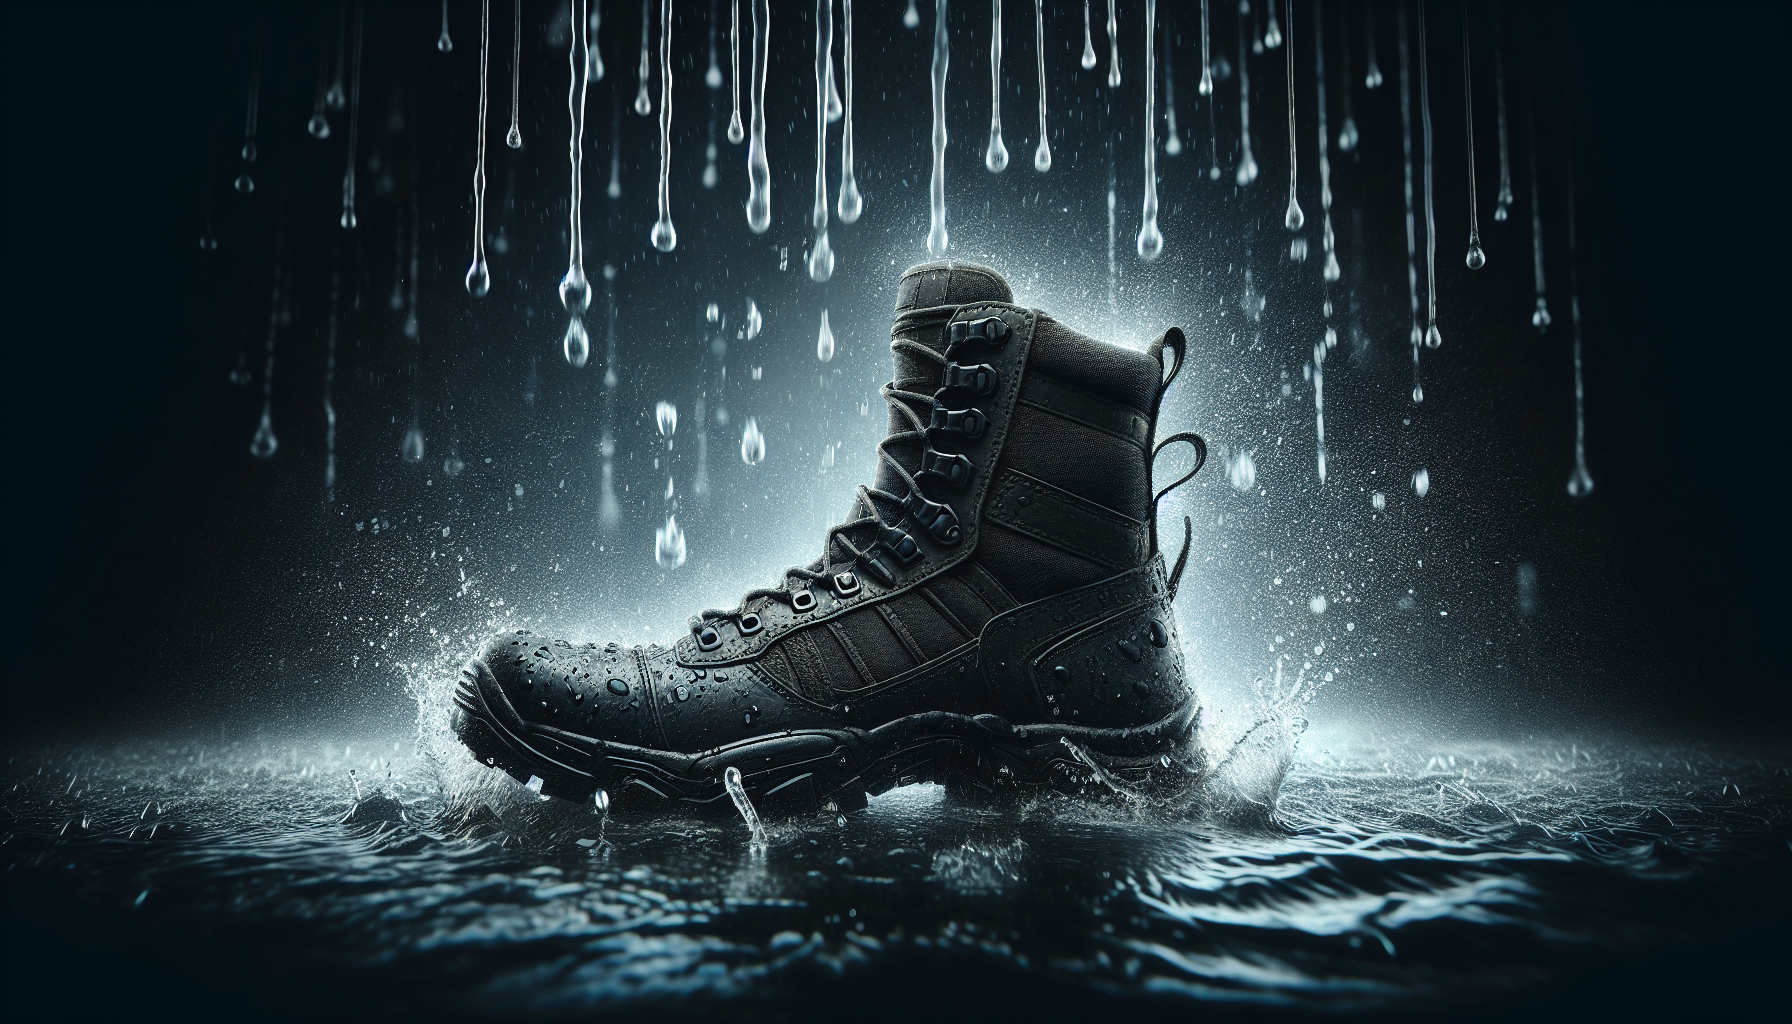 Best Ways To Waterproof Your Tactical Boots For All-weather Use